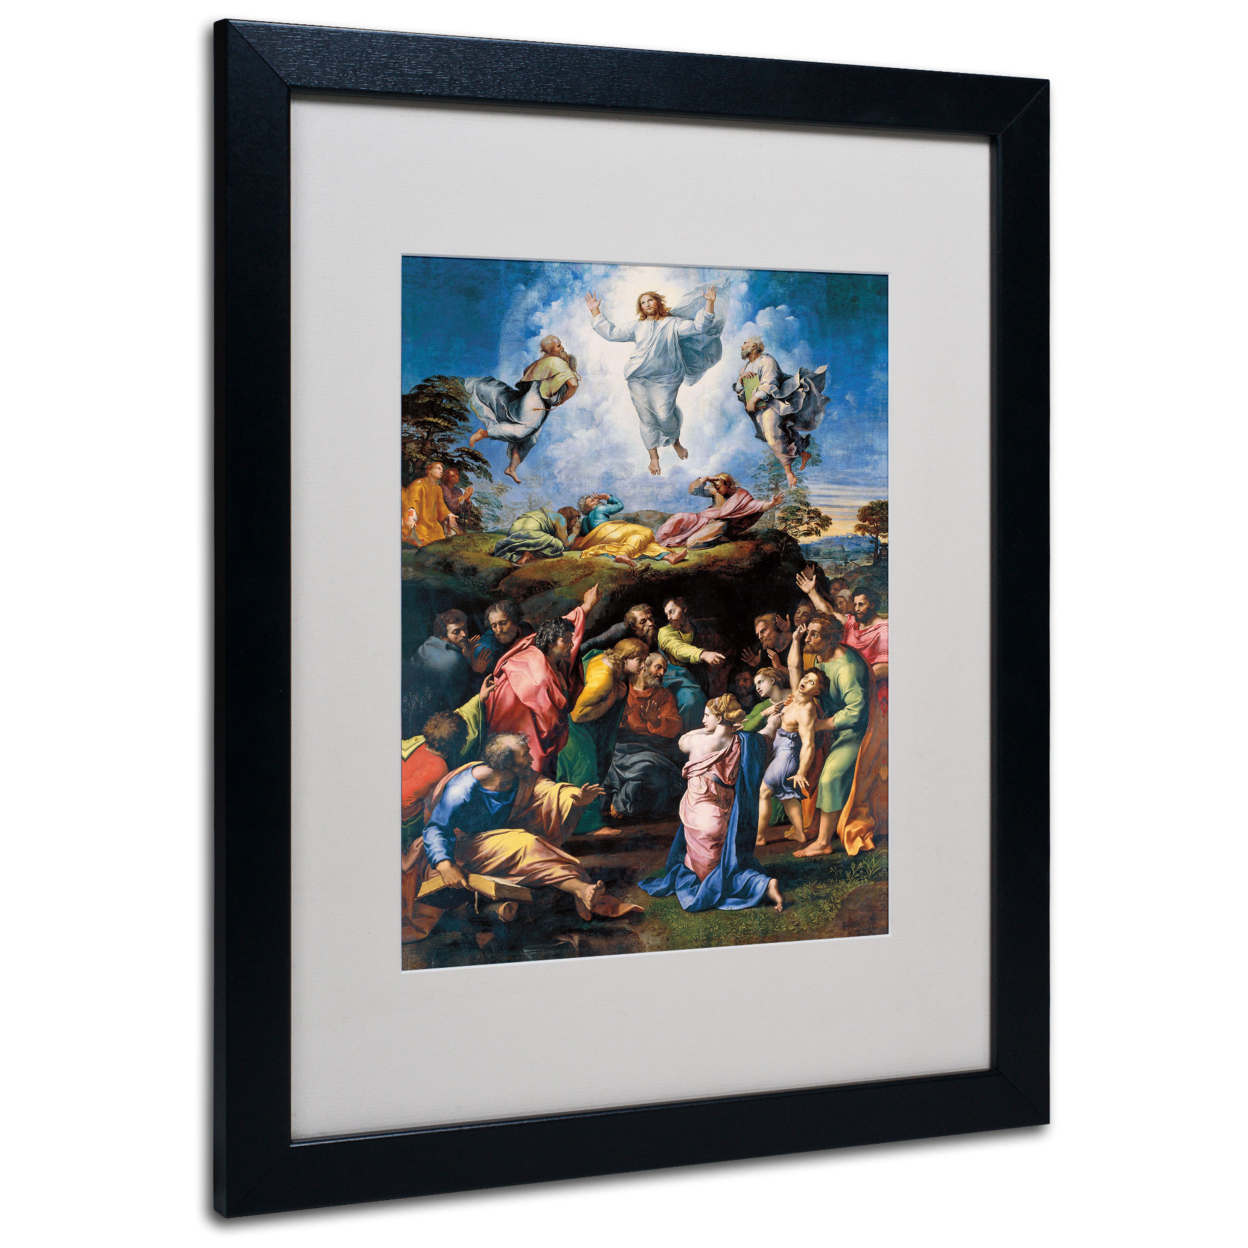 Raphael 'The Transfiguration 1519-20' Black Wooden Framed Art 18 X 22 Inches